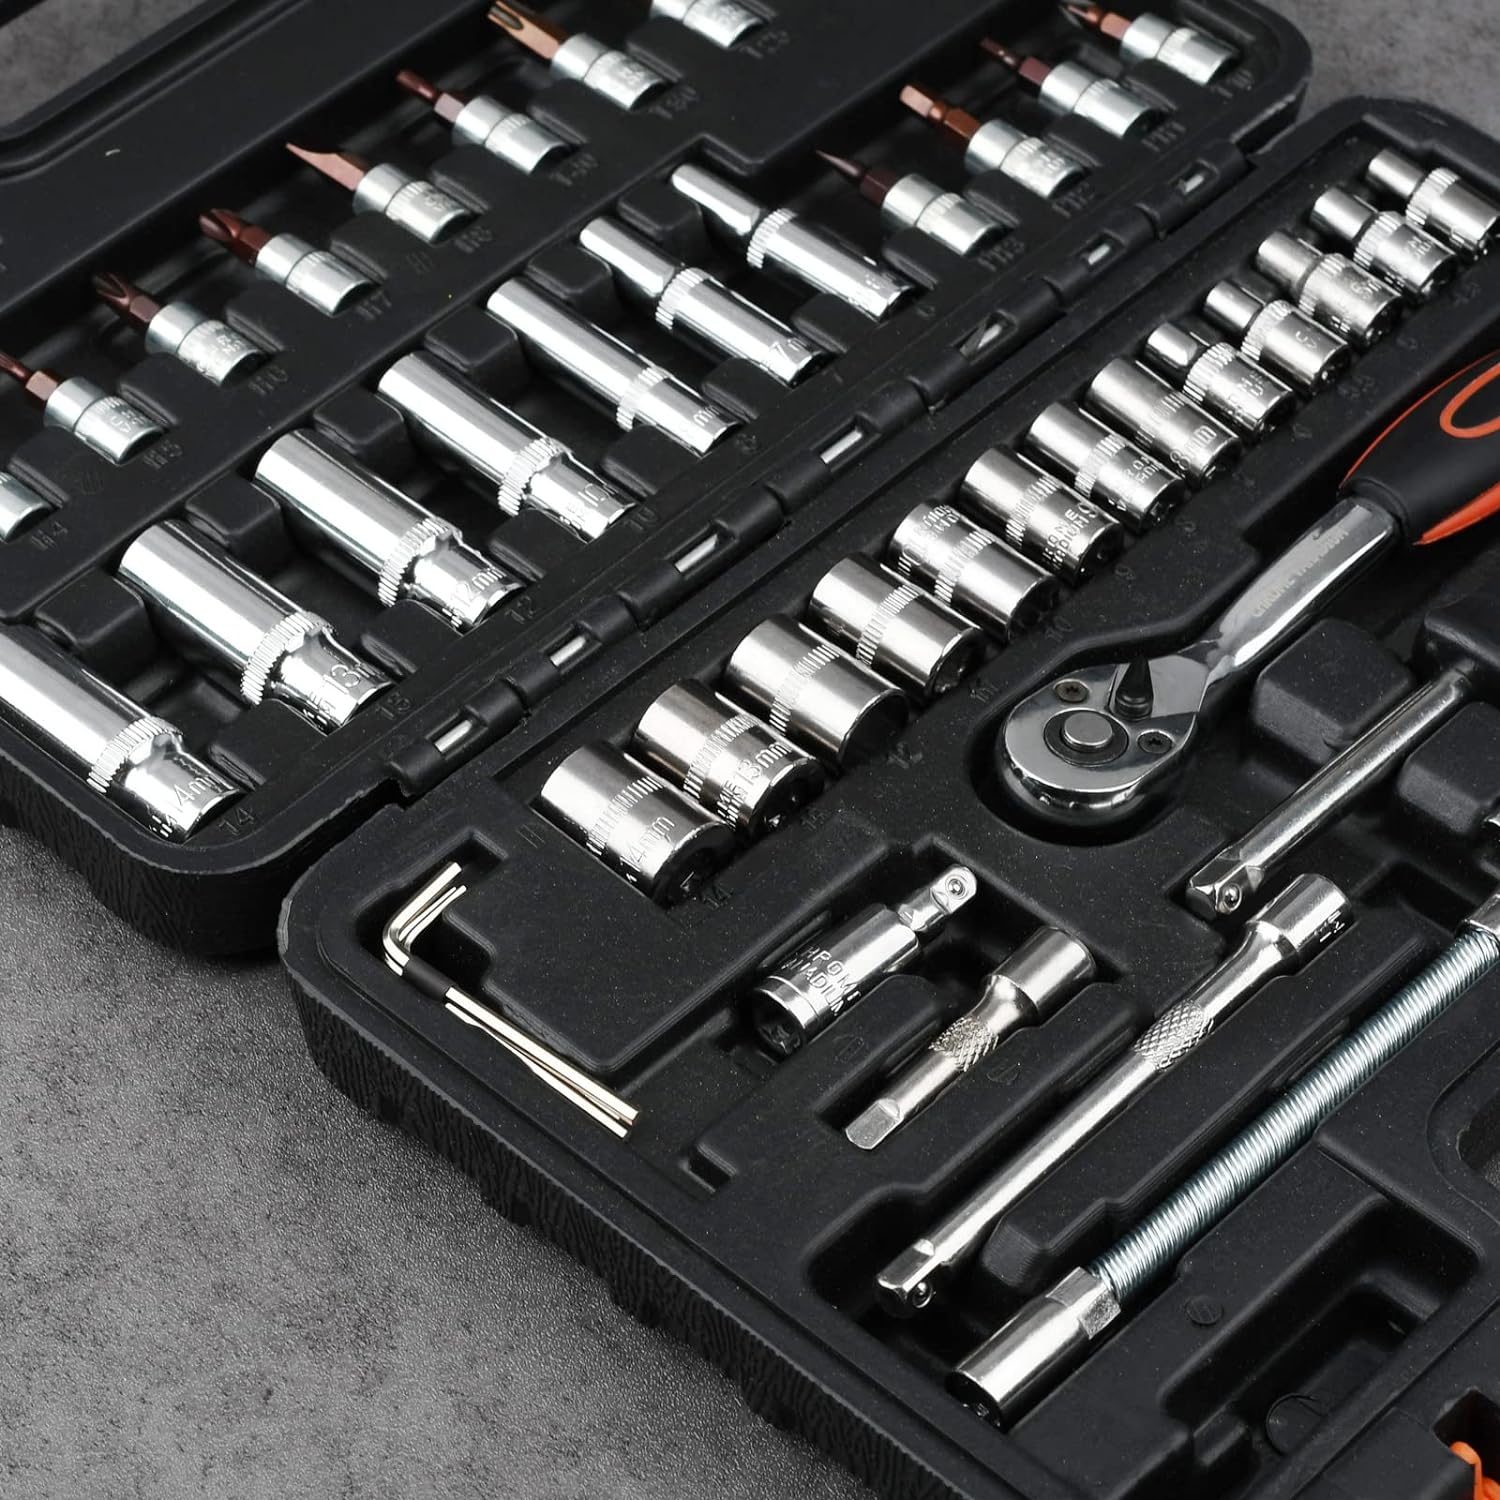 53-Piece 1/4 Socket Set,Driver Bits Metric Tool Set,72 Teeth Quick Release Ratchet Wrench Set with Flexible Extension Rods,S2 Screwdriver Bit,CRV Sockets/Deep Sockets,Tool for Car Bicycle RepairDIY